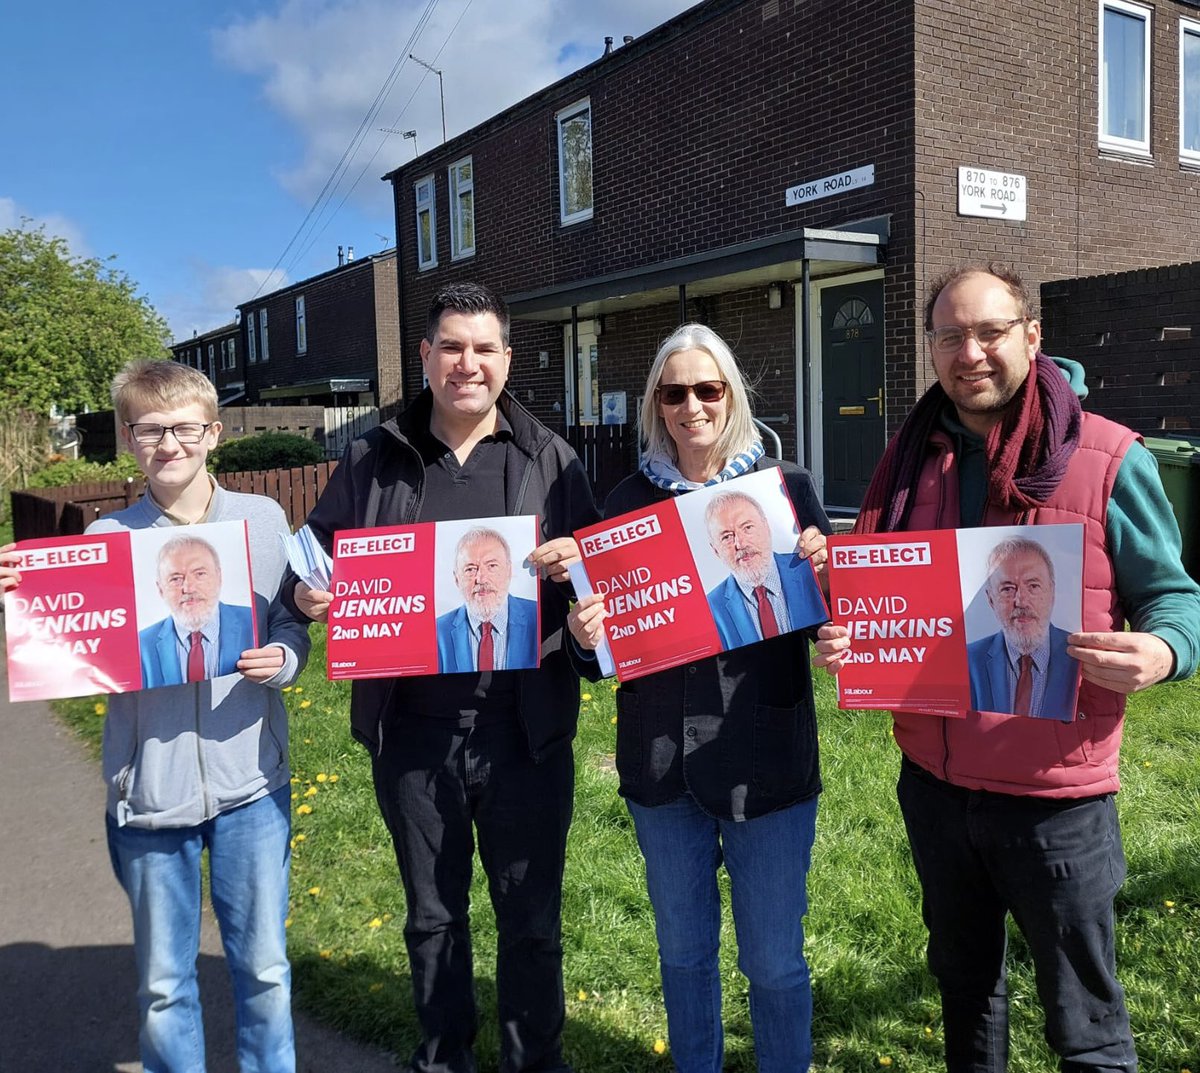 Out campaigning for David Jenkins in Seacroft! David lives in the heart of Seacroft and has worked so hard representing local residents - firstly in his time at the Citizen’s Advice Bureau and now as a local Labour Councillor. Re-elect Labour’s local champion David Jenkins!